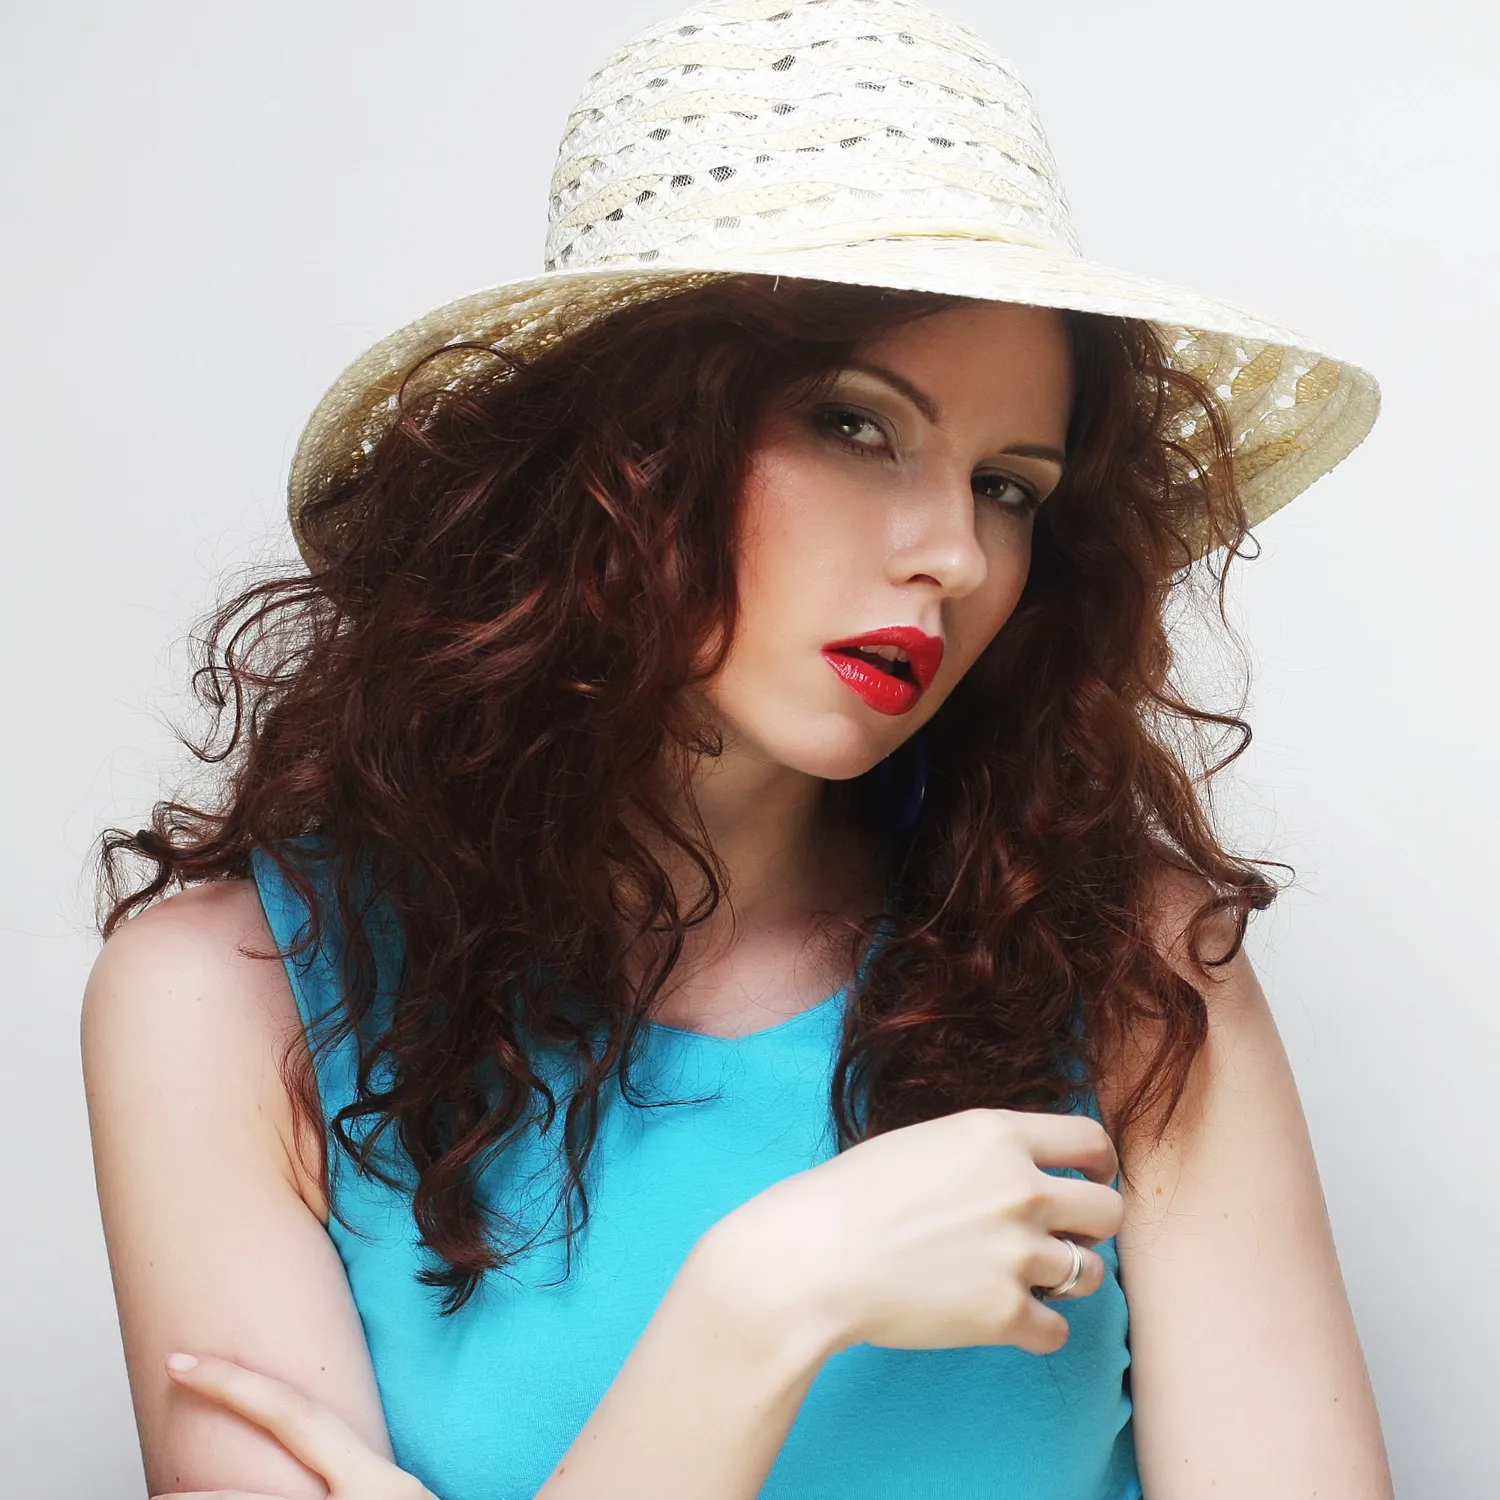 Beautiful woman with hat, happy time